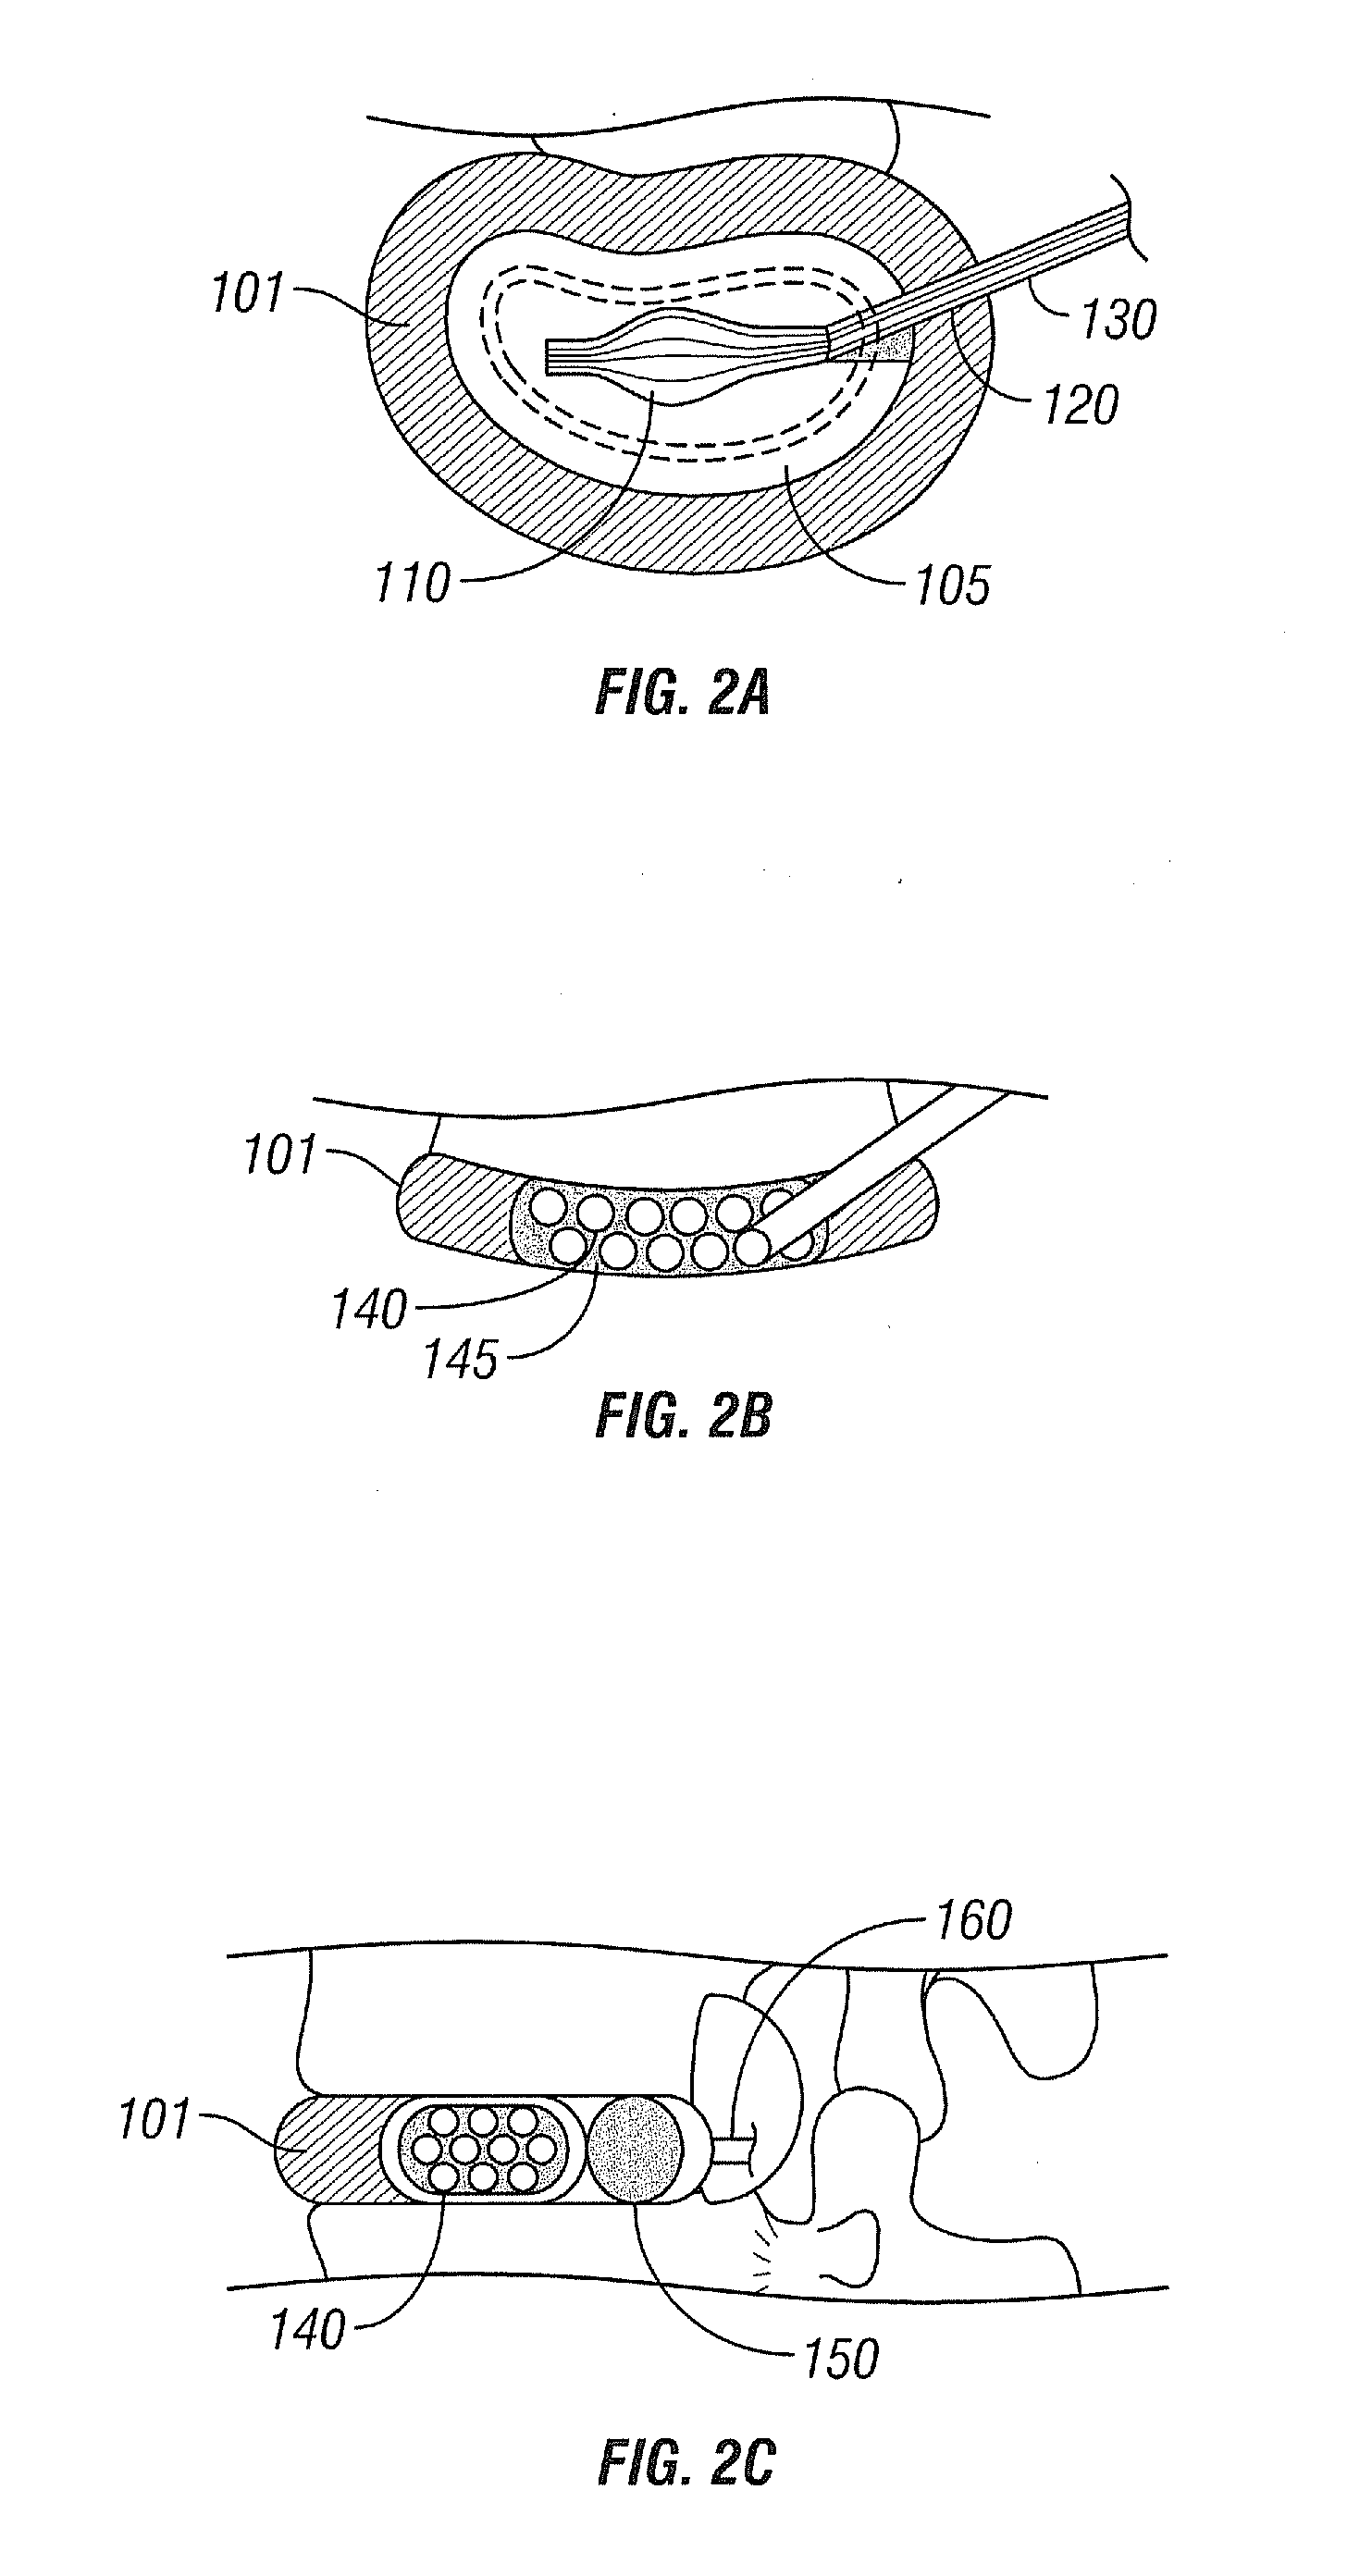 Intervertebral Nucleus and Annulus Implants and Method of Use Thereof